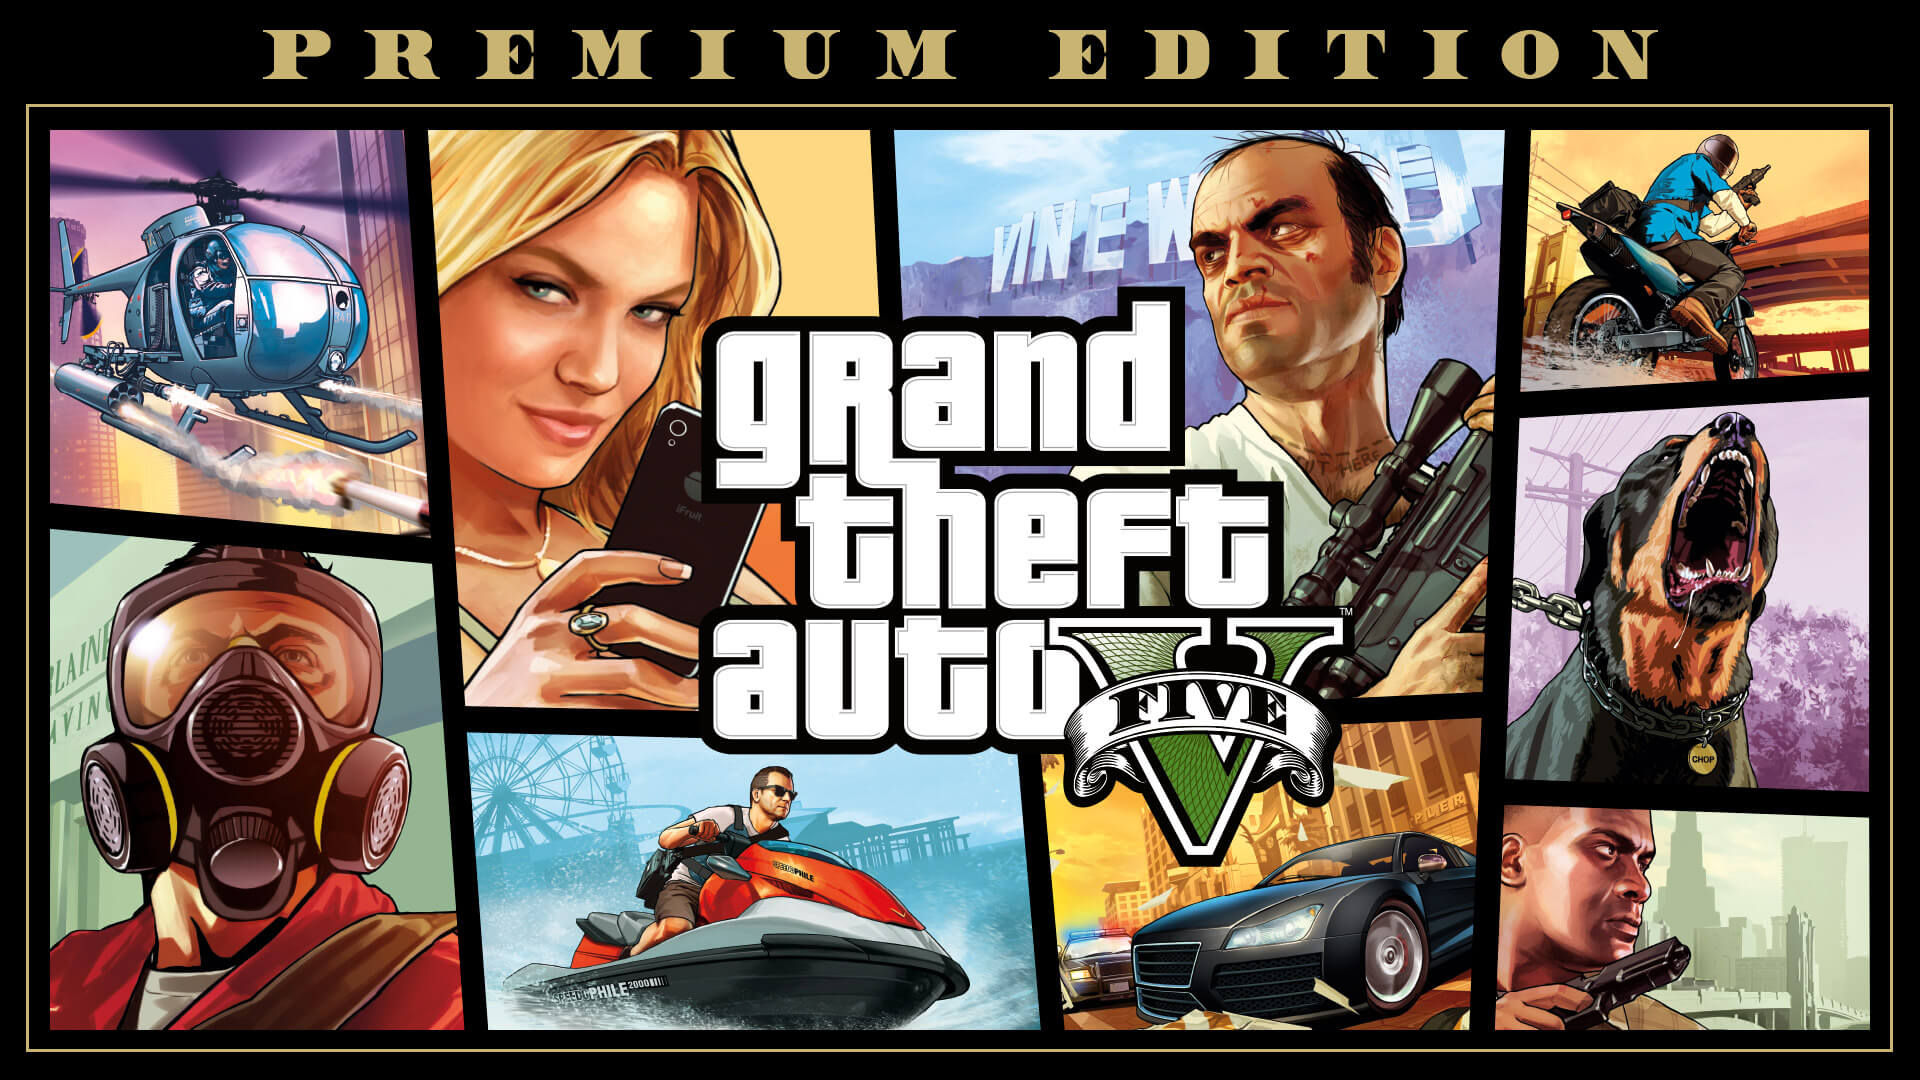 Grand Theft Auto V - Most Downloaded PC Video Games in the World